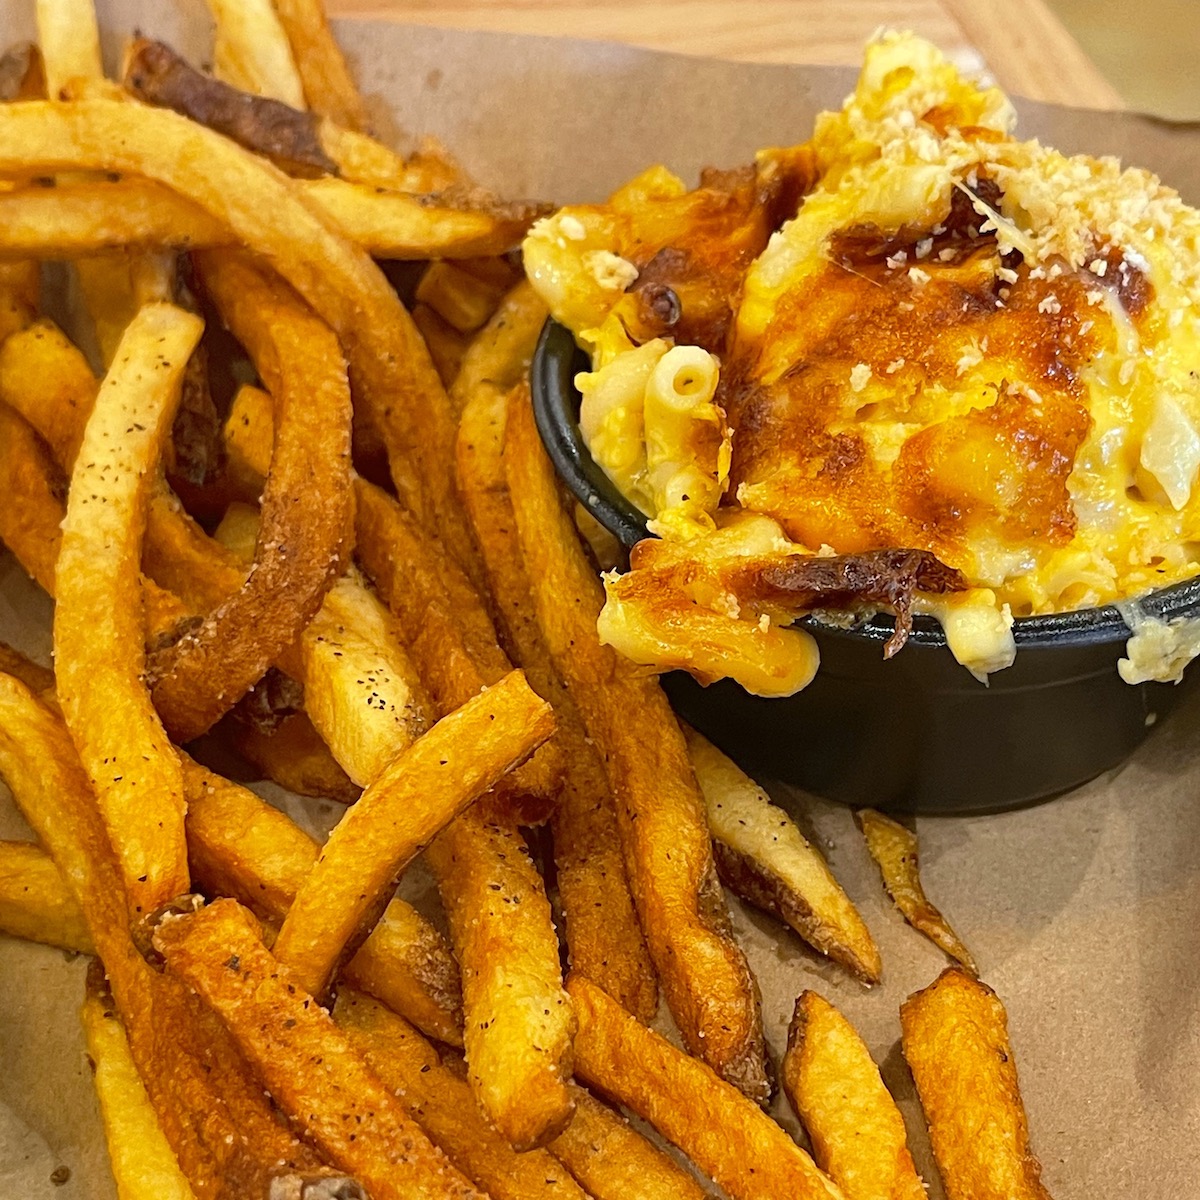 Fresh Cut Fries and Mac-N-Cheese from Mission BBQ in Doral, Florida